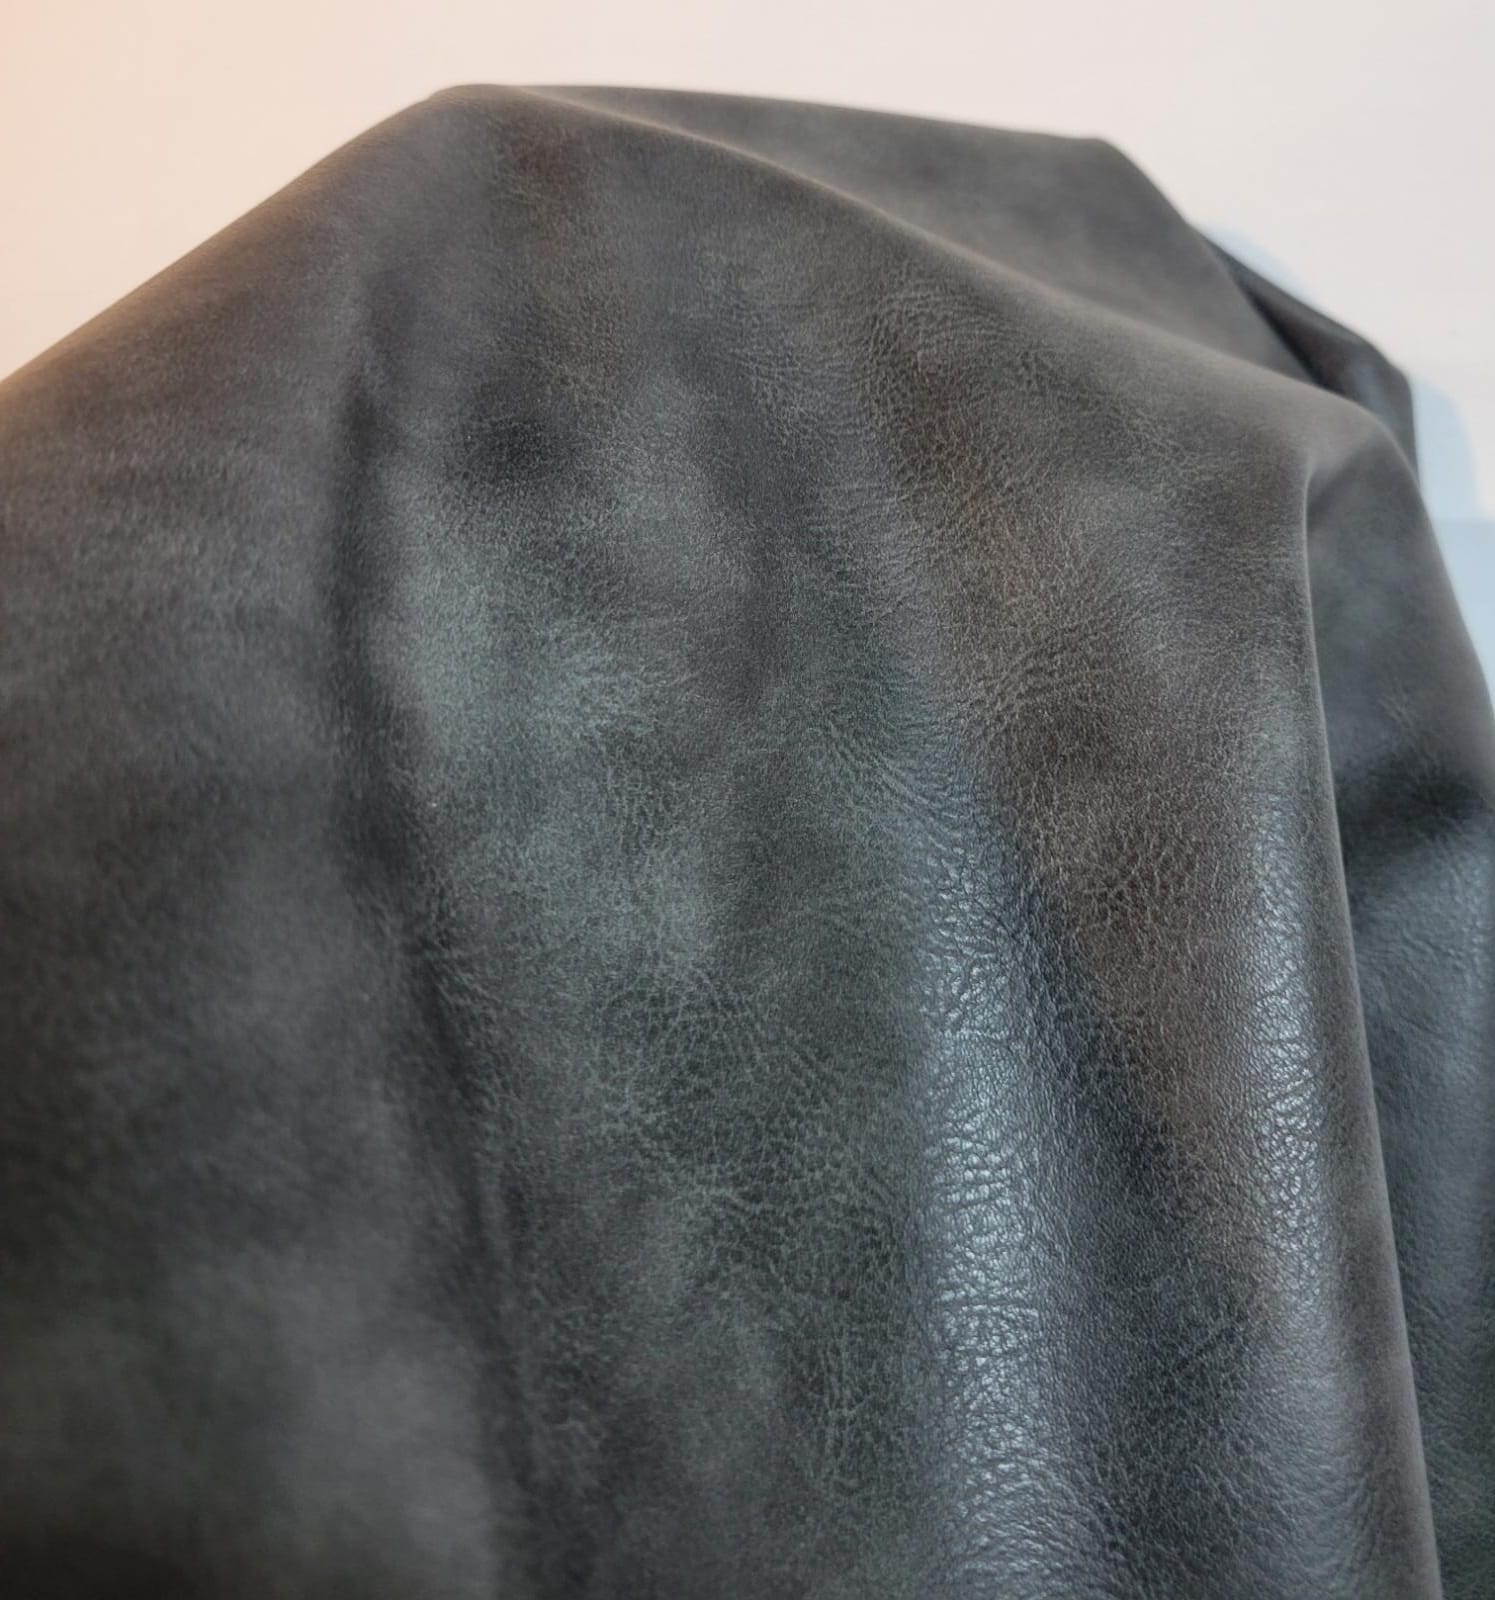  Faux vegan leather by the yard sheets distressed leather fabric for upholstery 30,000 Double Rubs vinyl sheets nappa leather crafts bookbinding books furniture fabrics uphilstery fuax material pu pleather faiux learher cruelty free nappa seat graphite gray antique 